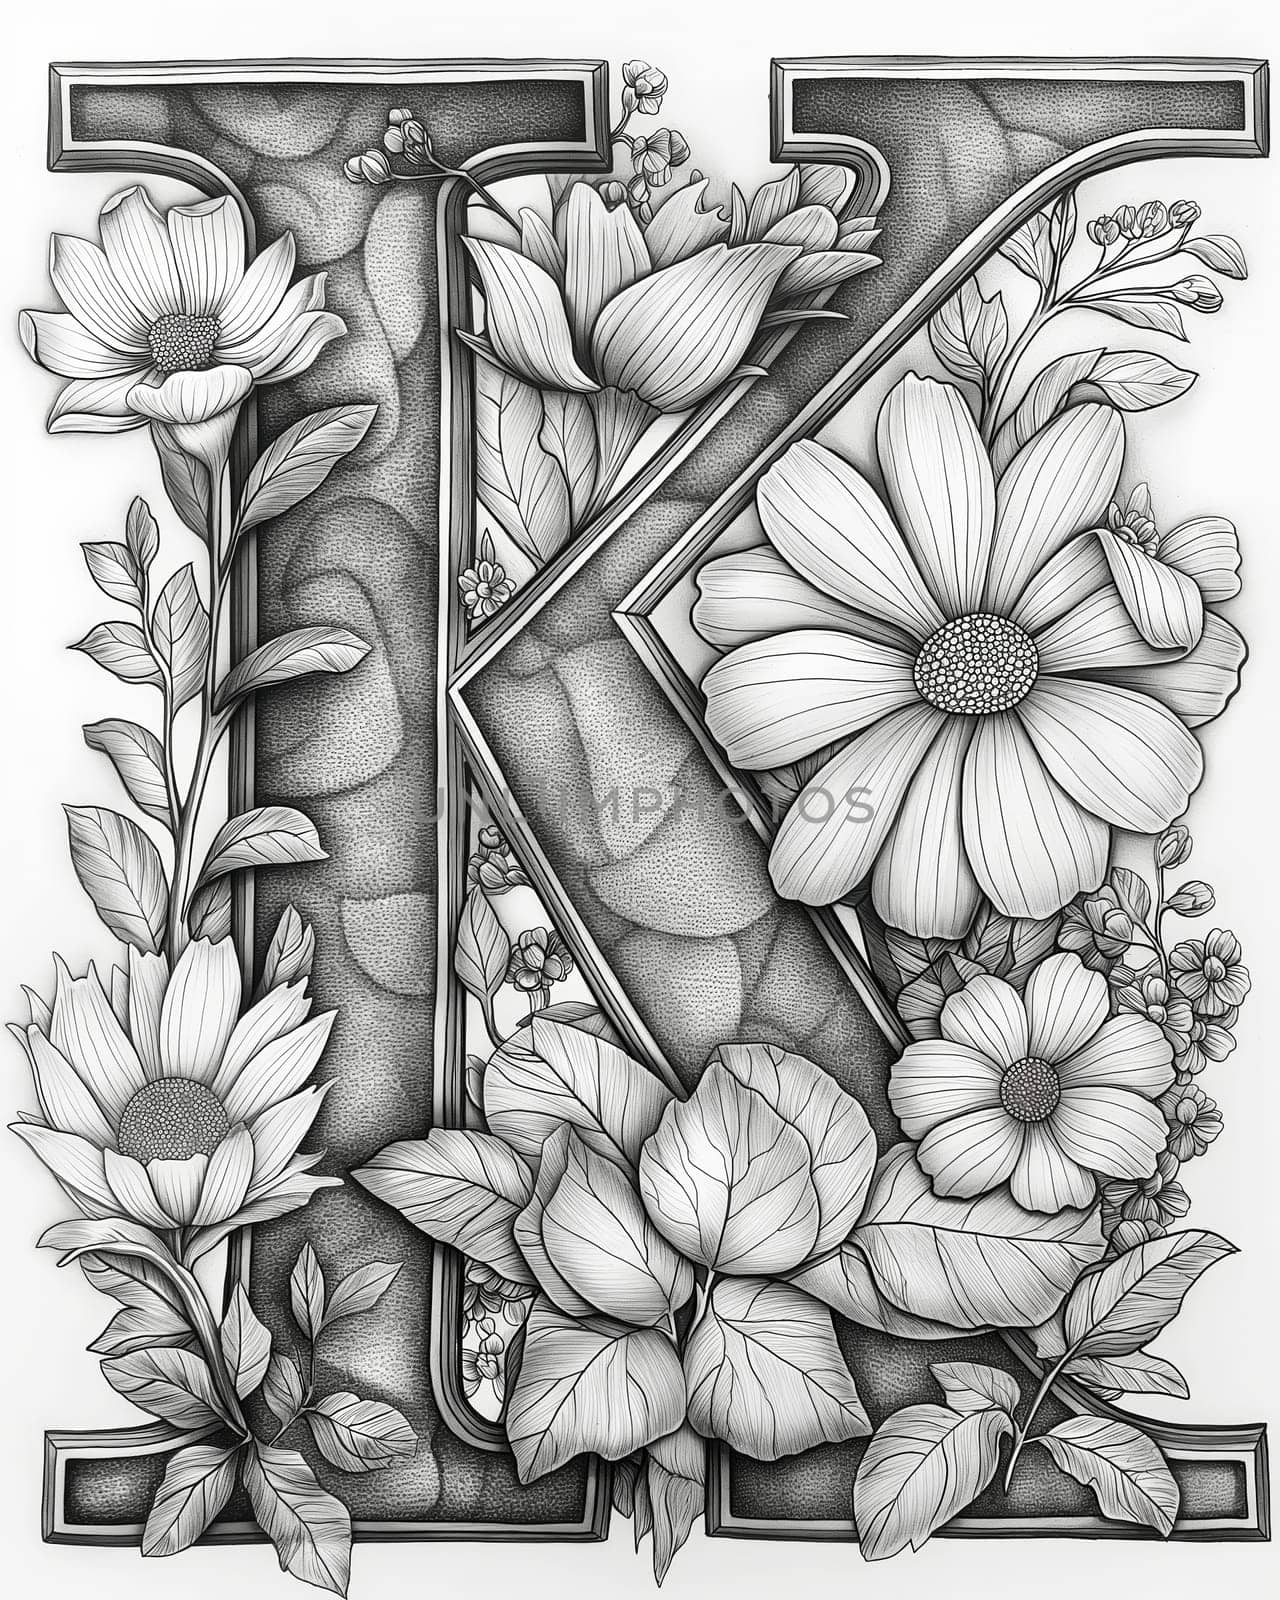 Coloring book for children letter K with flowers. by Fischeron